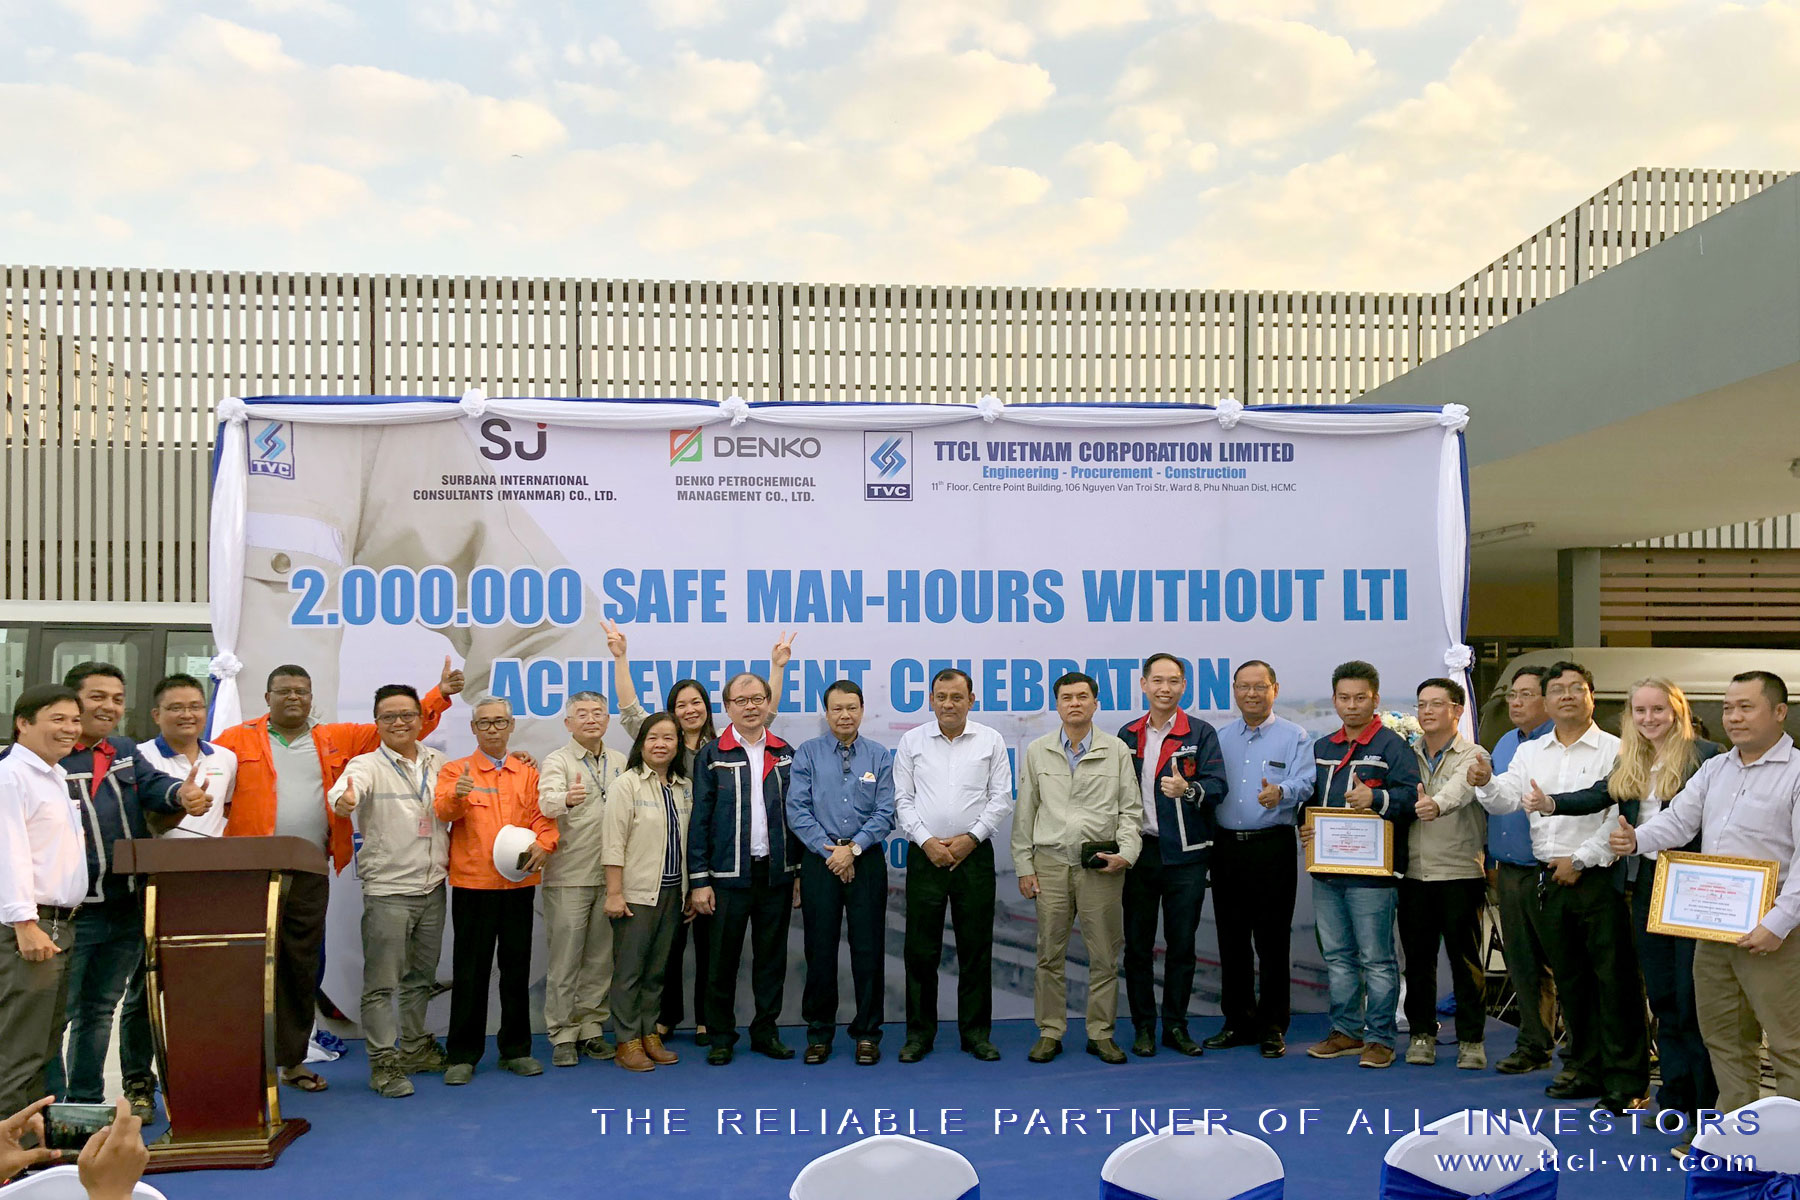 2.000.000 SAFE MAN-HOURS WITHOUT LTI ACHIEVEMENT CELEBRATION – READY FOR OIL IN